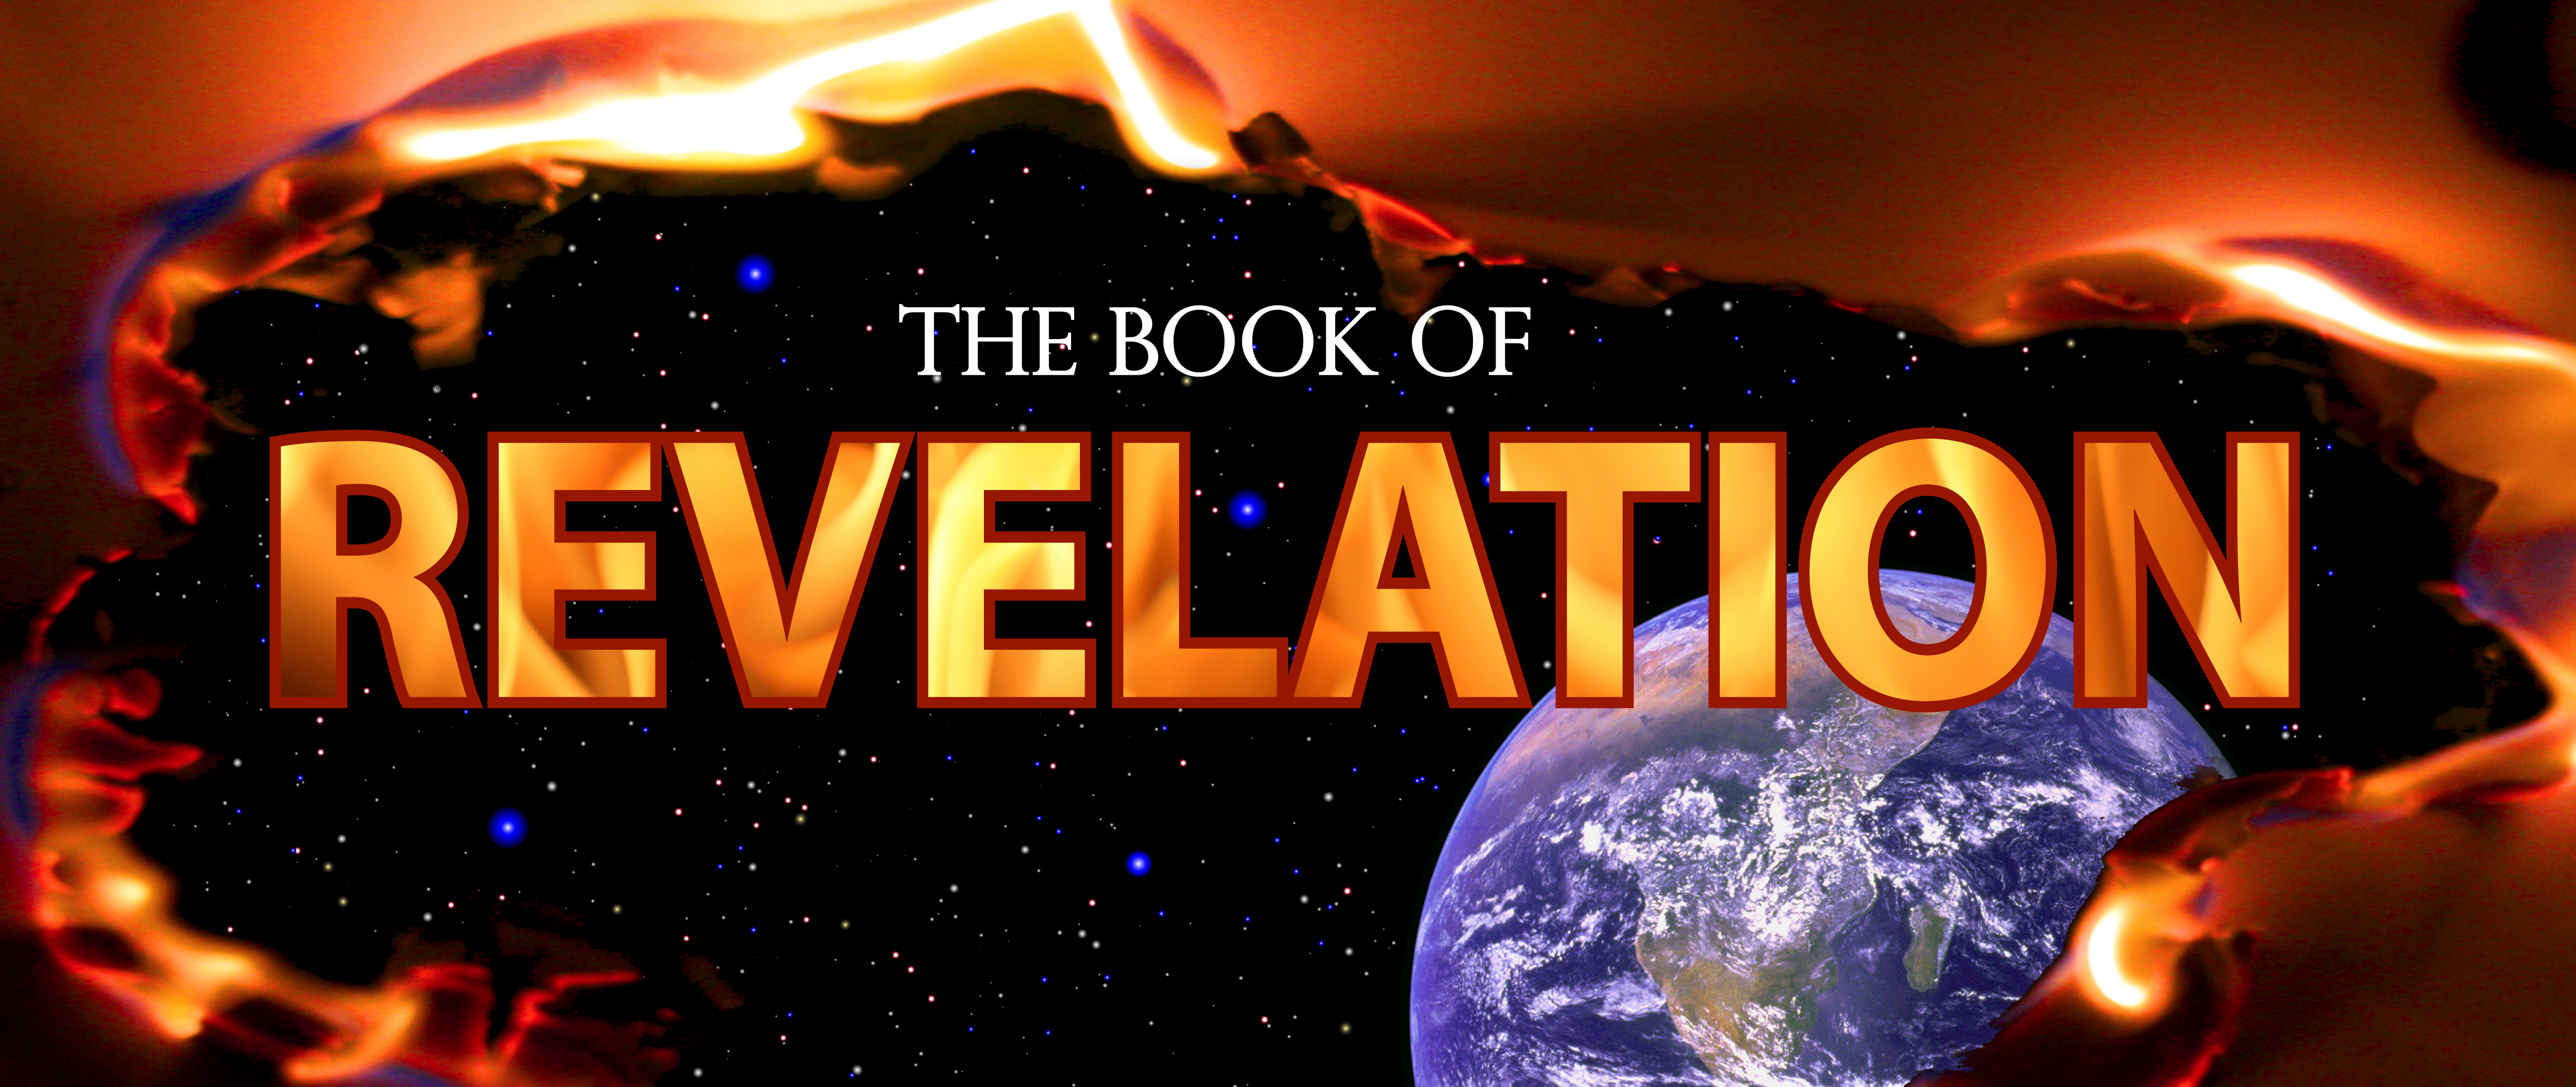 book of revelation clipart - photo #35